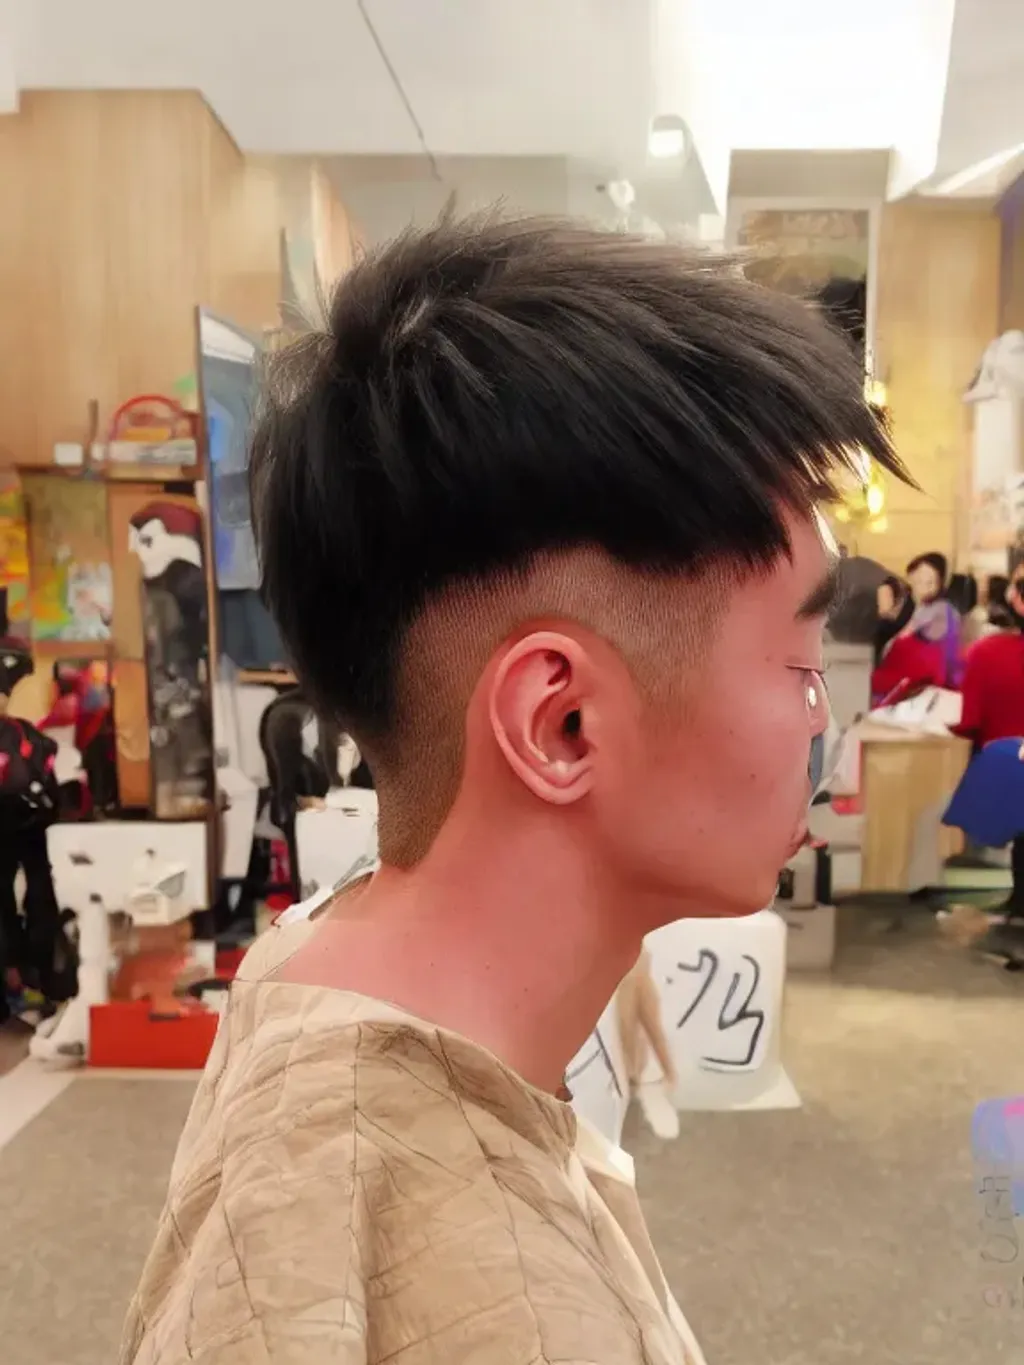 How to get a 2 block haircut in spanish｜TikTok Search